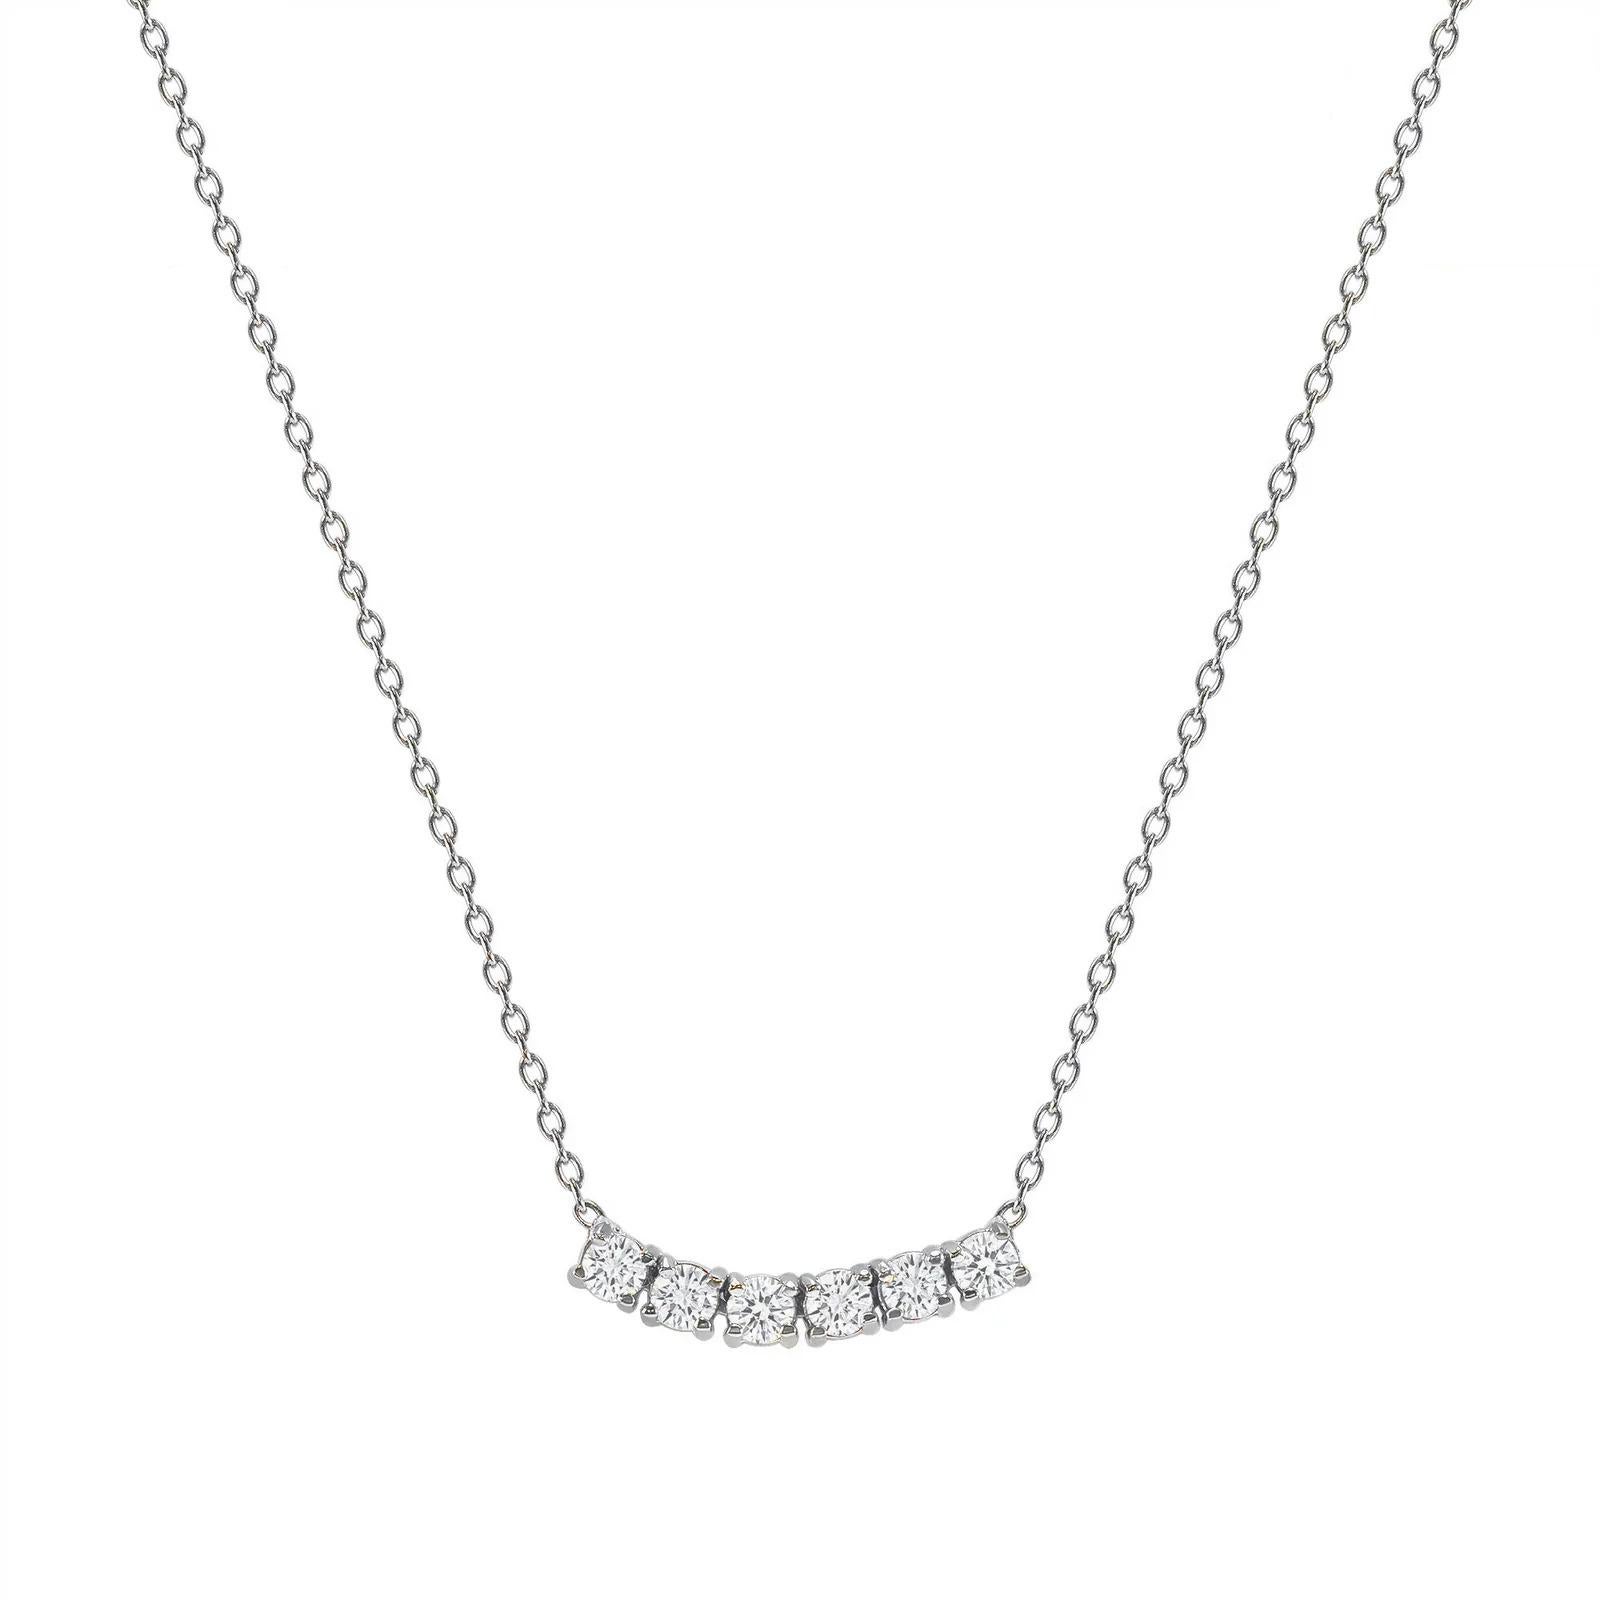 This petite, curved diamond necklace is crafted with gorgeous 14k gold set with six round diamonds.  

Gold: 14k 
Diamond Total Carats: 1.5 ct
Diamond Cut: Round (6 diamonds)
Diamond Clarity: VS
Diamond Color: F
Color: White Gold
Necklace Length: 24